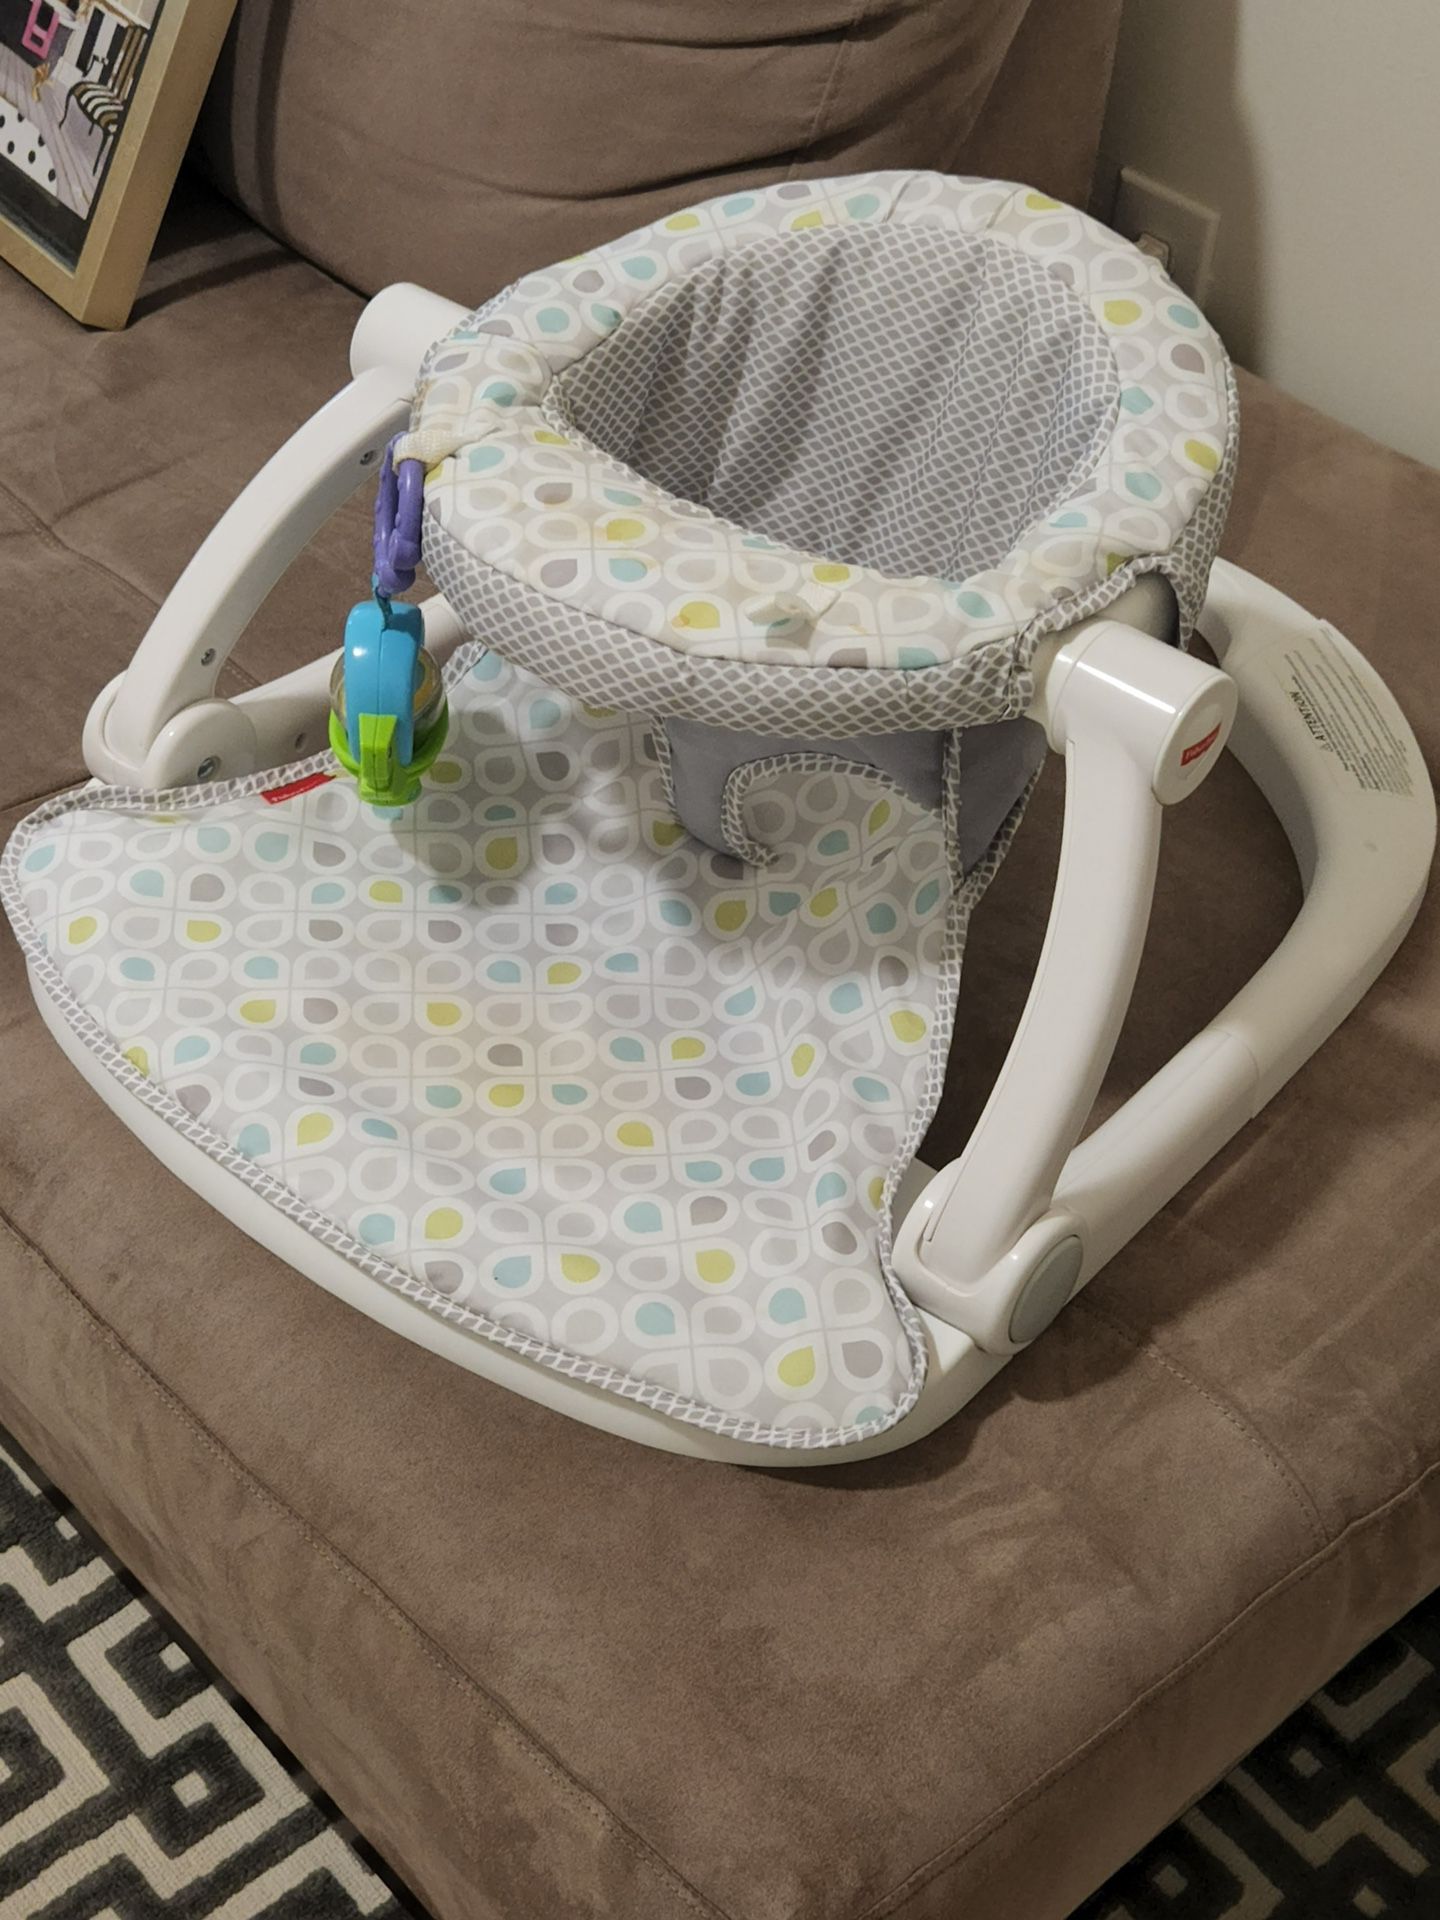 Assembled Baby seat